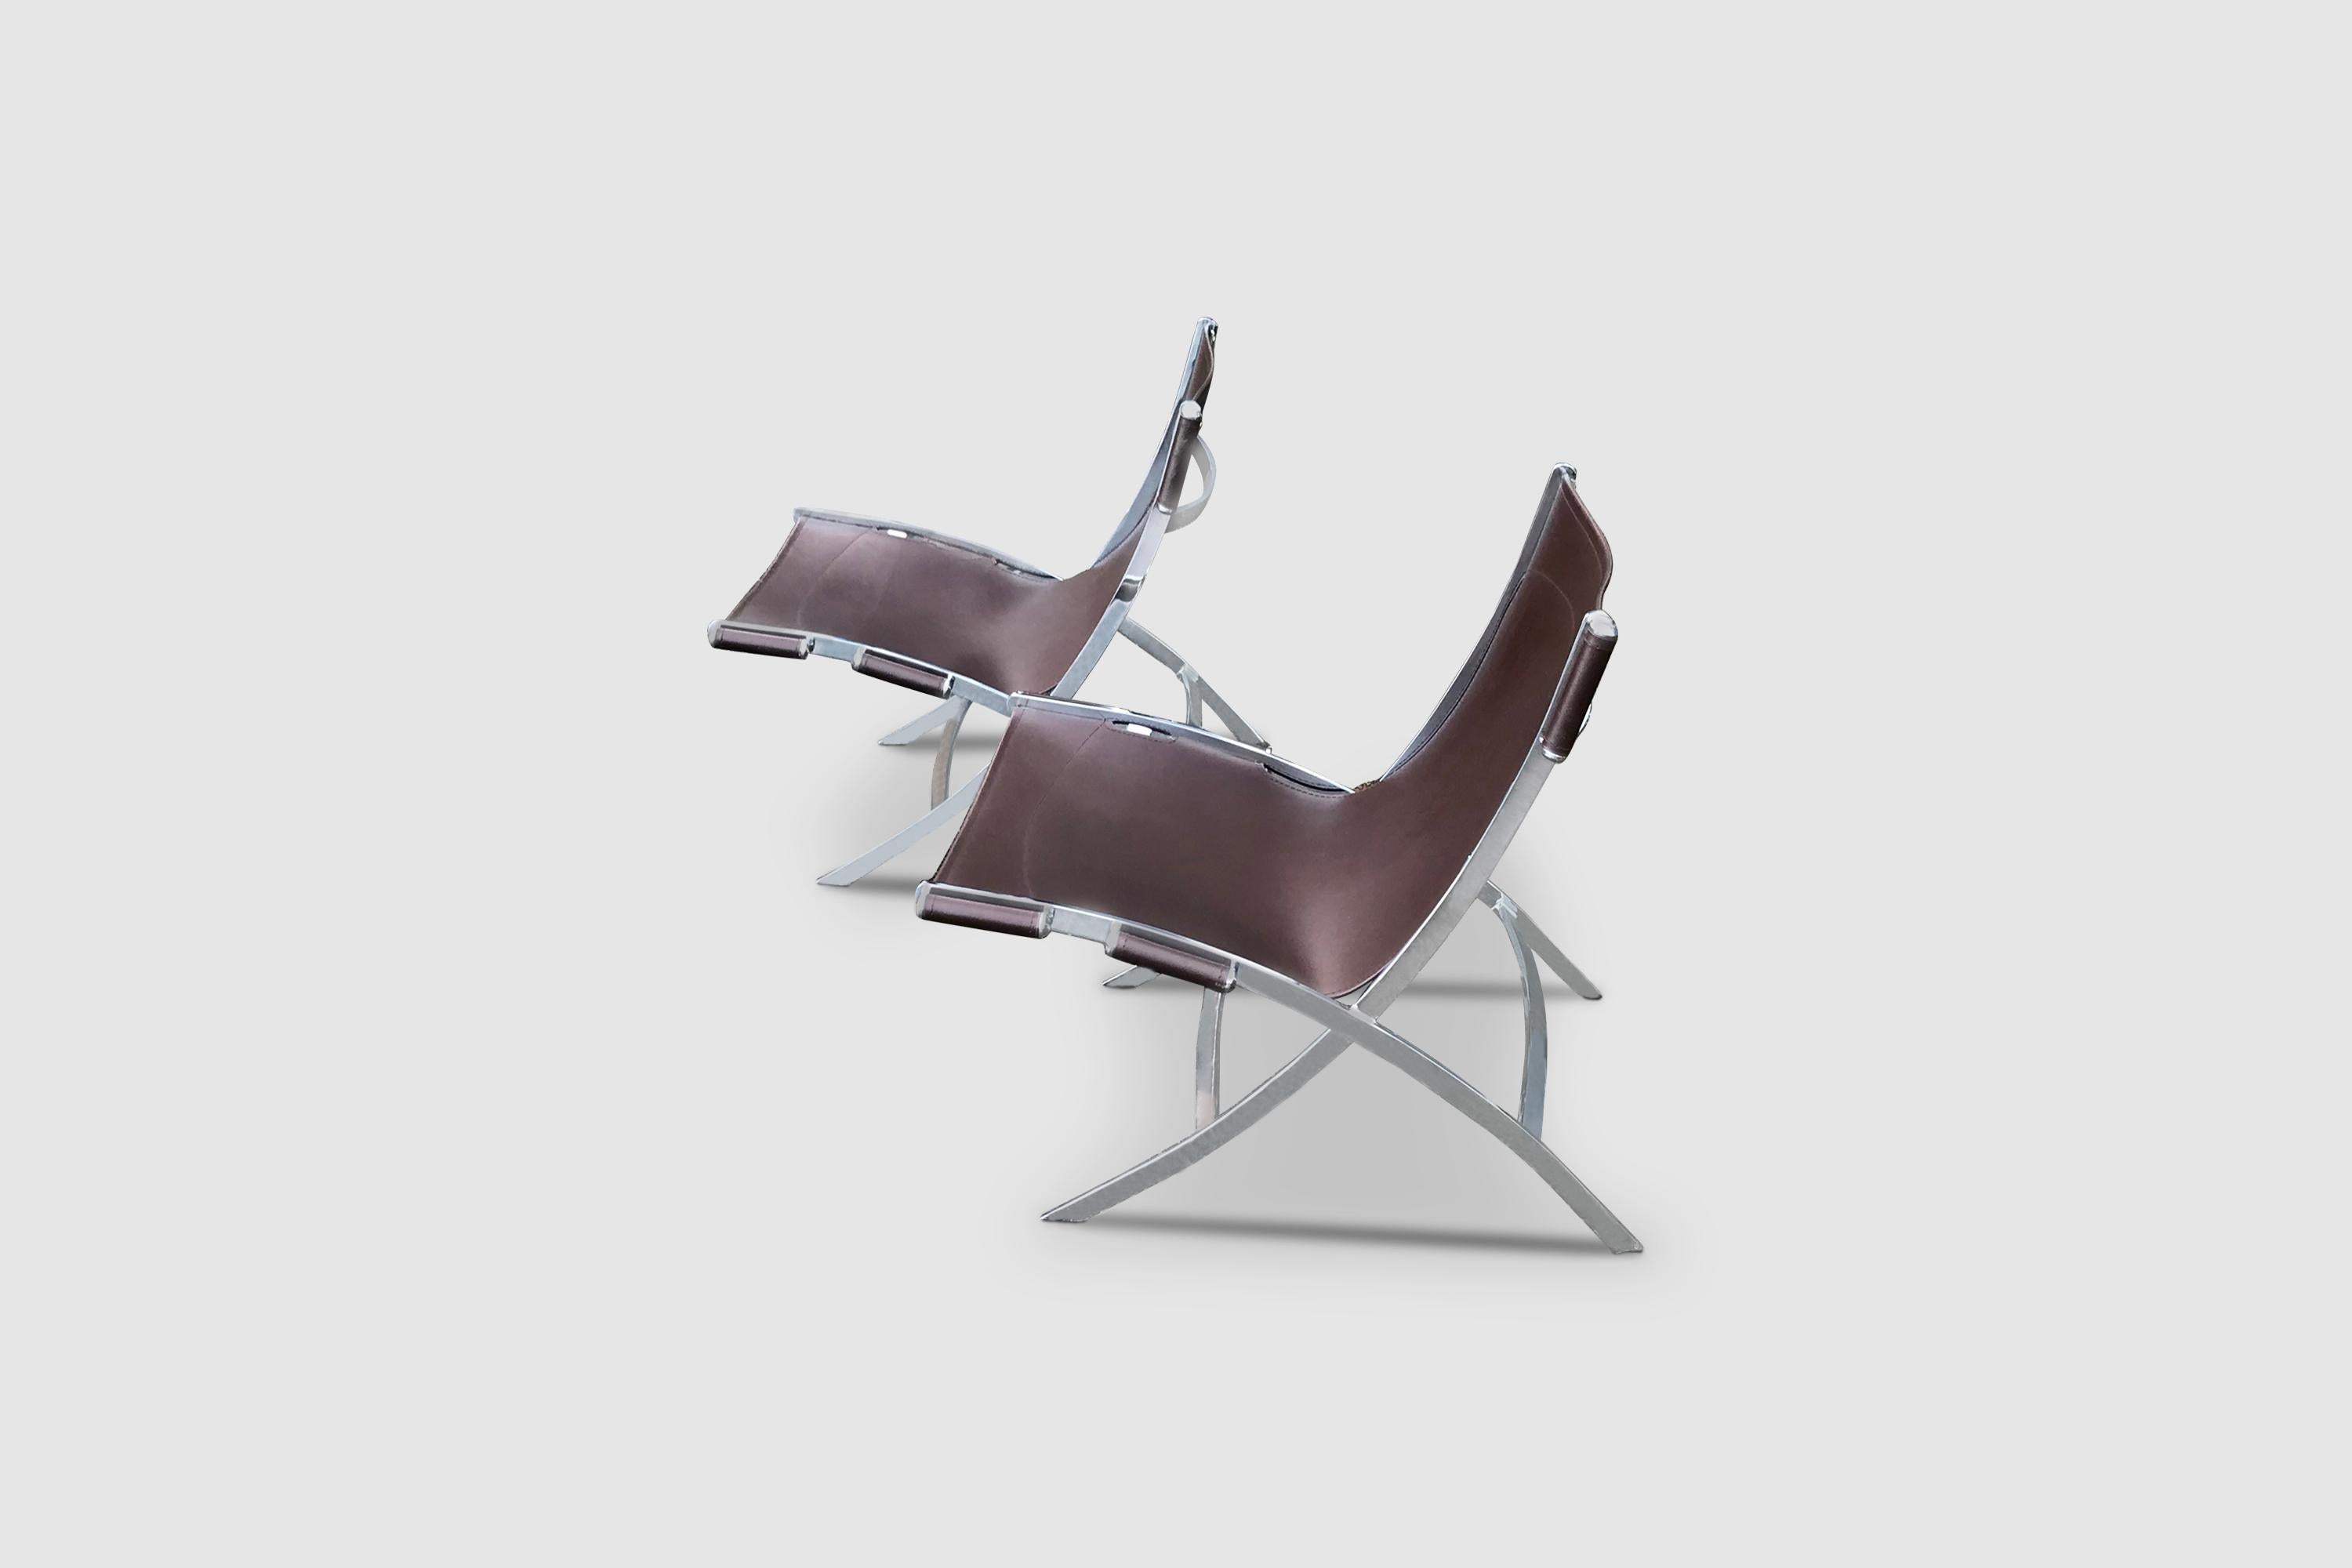 Steel Scissor lounge chairs by Paul Tuttle and Antonio Citterio for Flexform 1980s